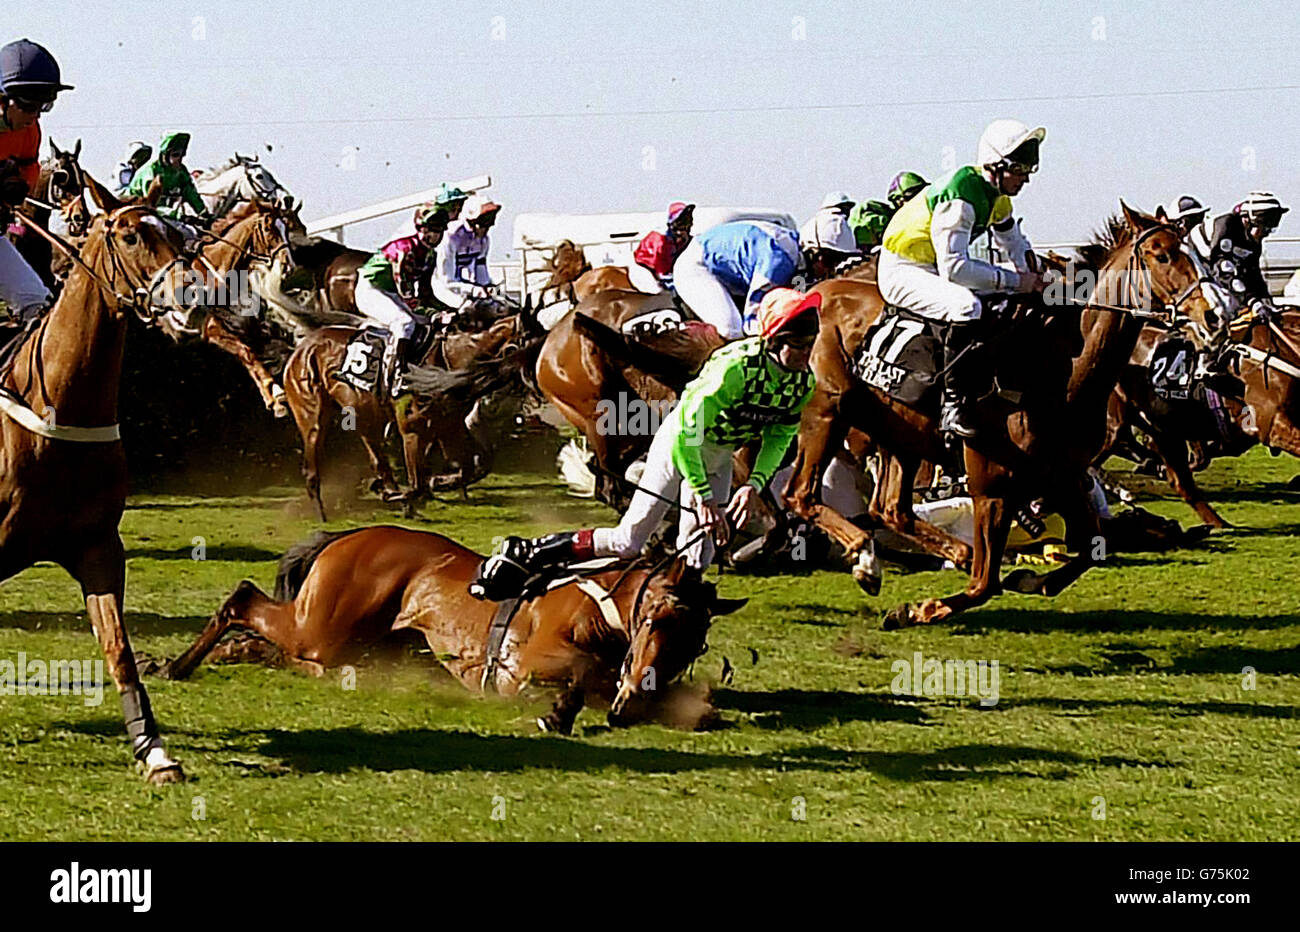 Grand National Wicked Crack. Connor O'Dwyer falls of Wicked Crack at the first fence during the Martell Grand National at Aintree. Stock Photo